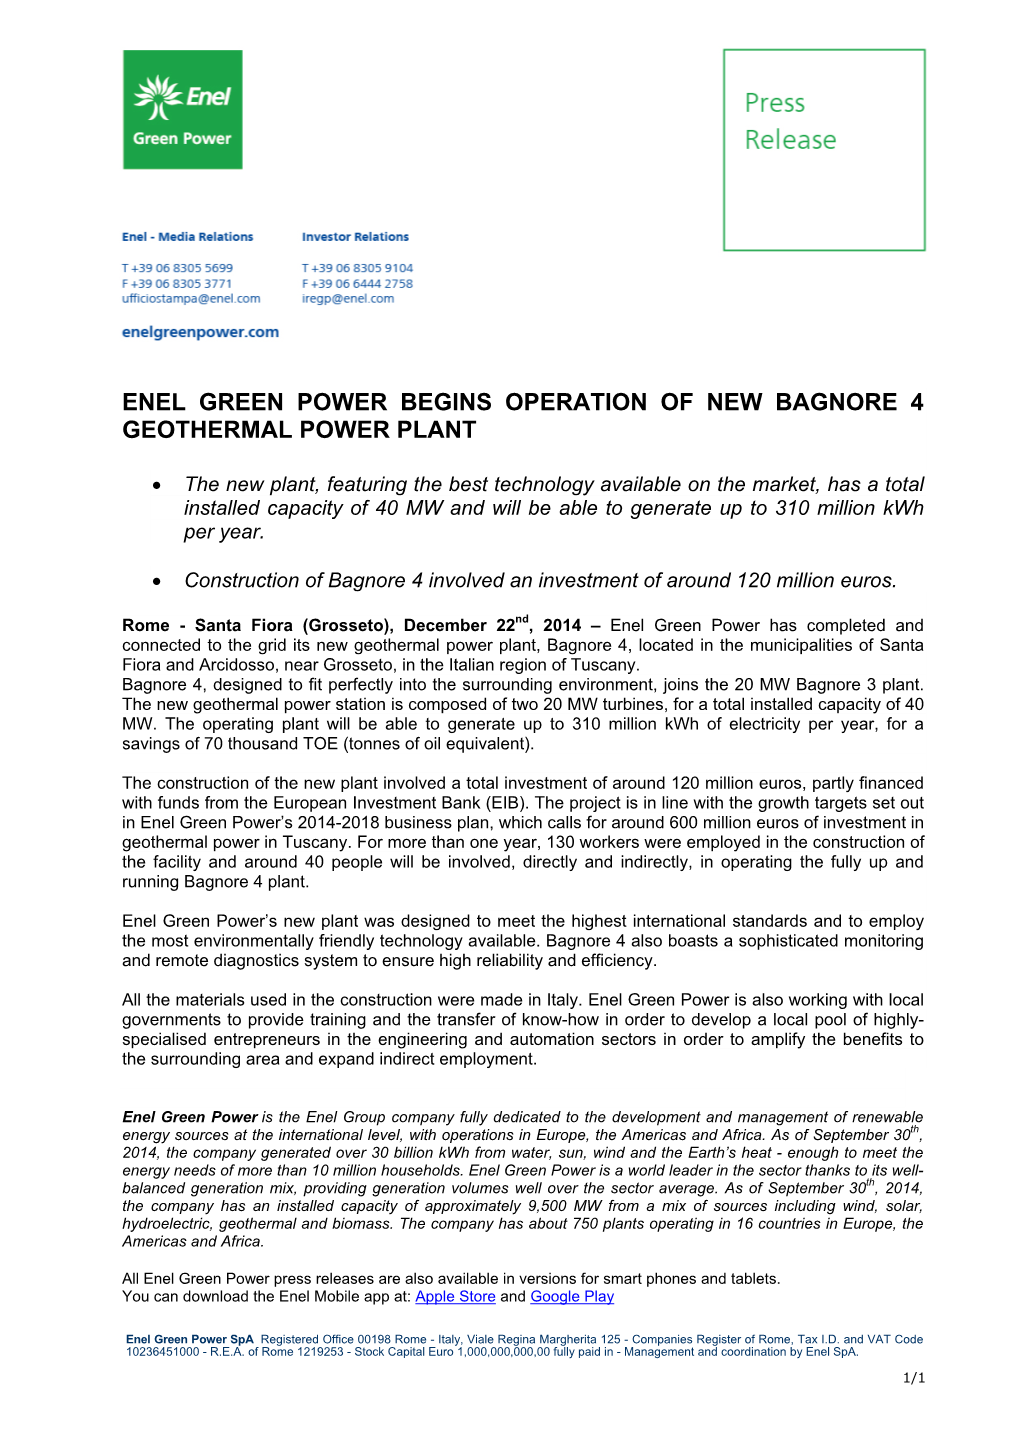 Enel Green Power Begins Operation of New Bagnore 4 Geothermal Power Plant